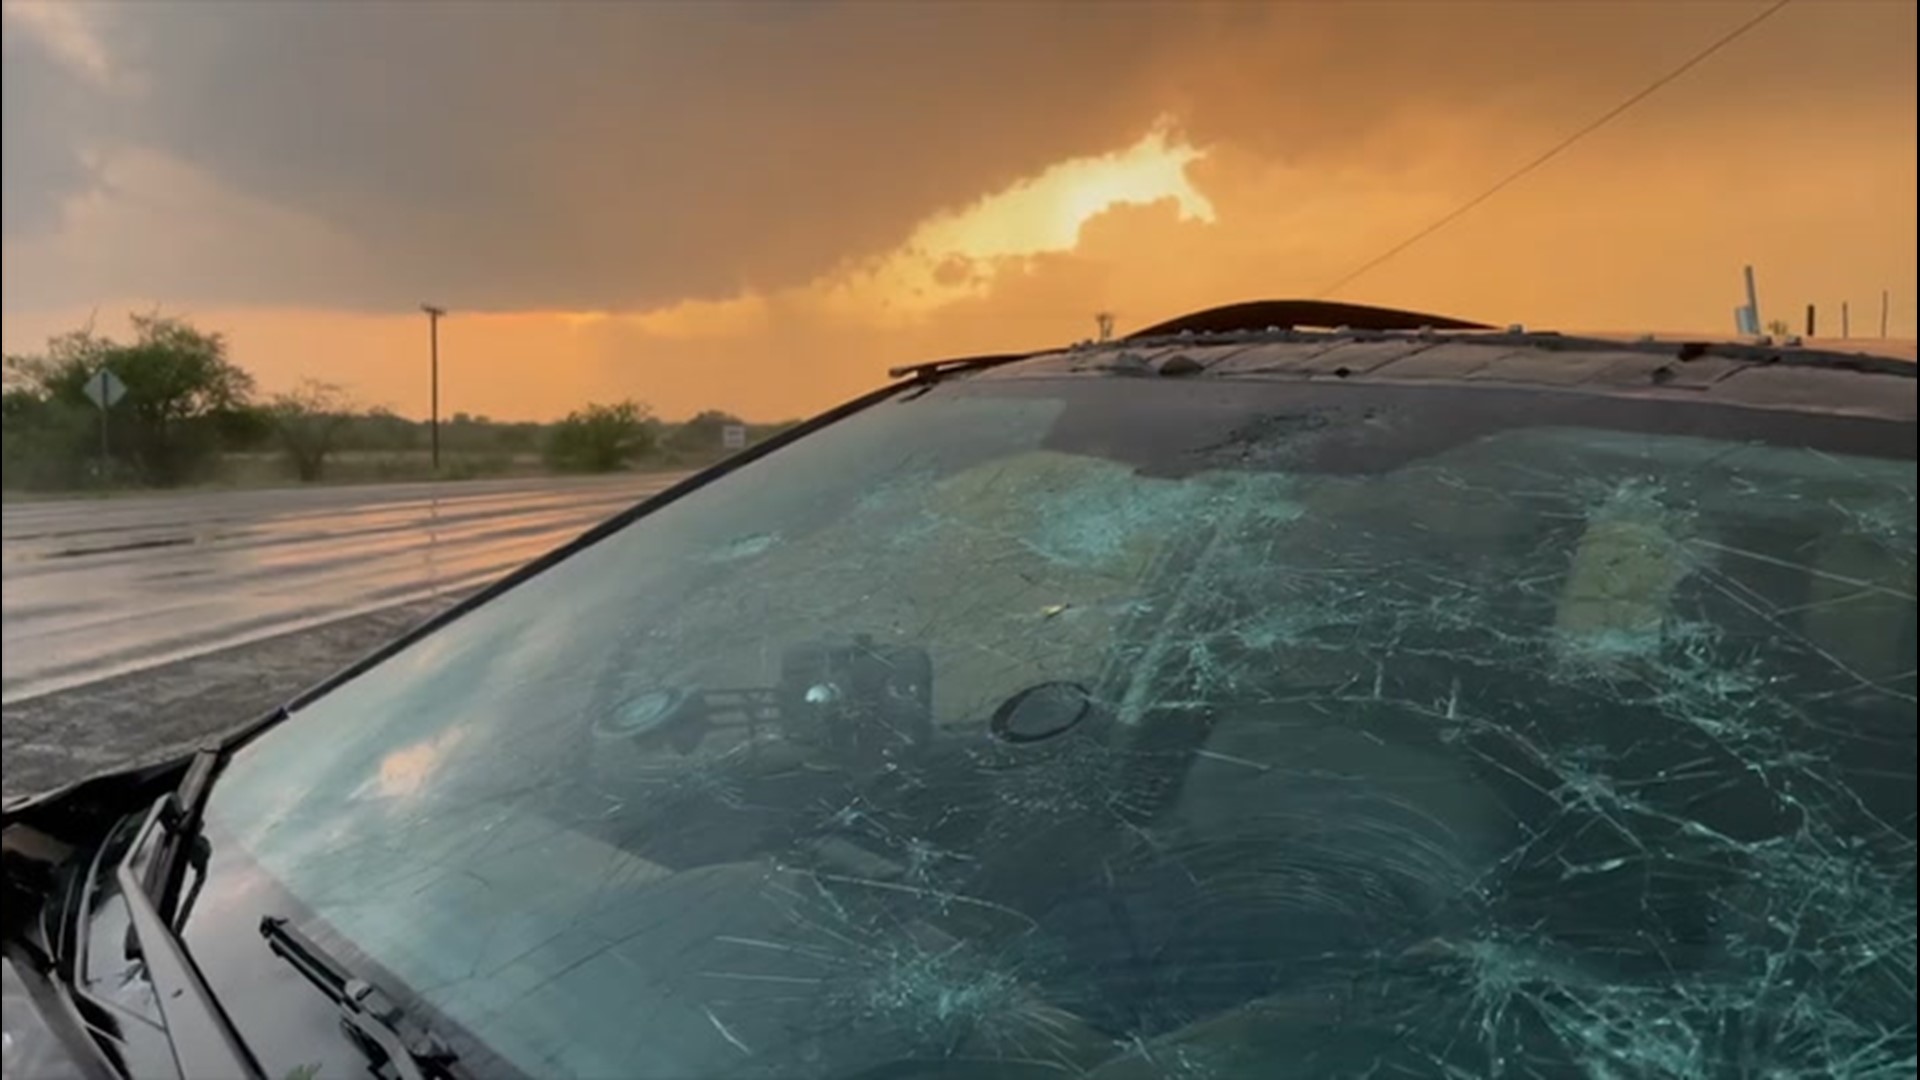 Extreme meteorologist Reed Timmer intercepted what he described as 'gorilla hail' in Llano, Texas, on April 13, wrecking his windshield.